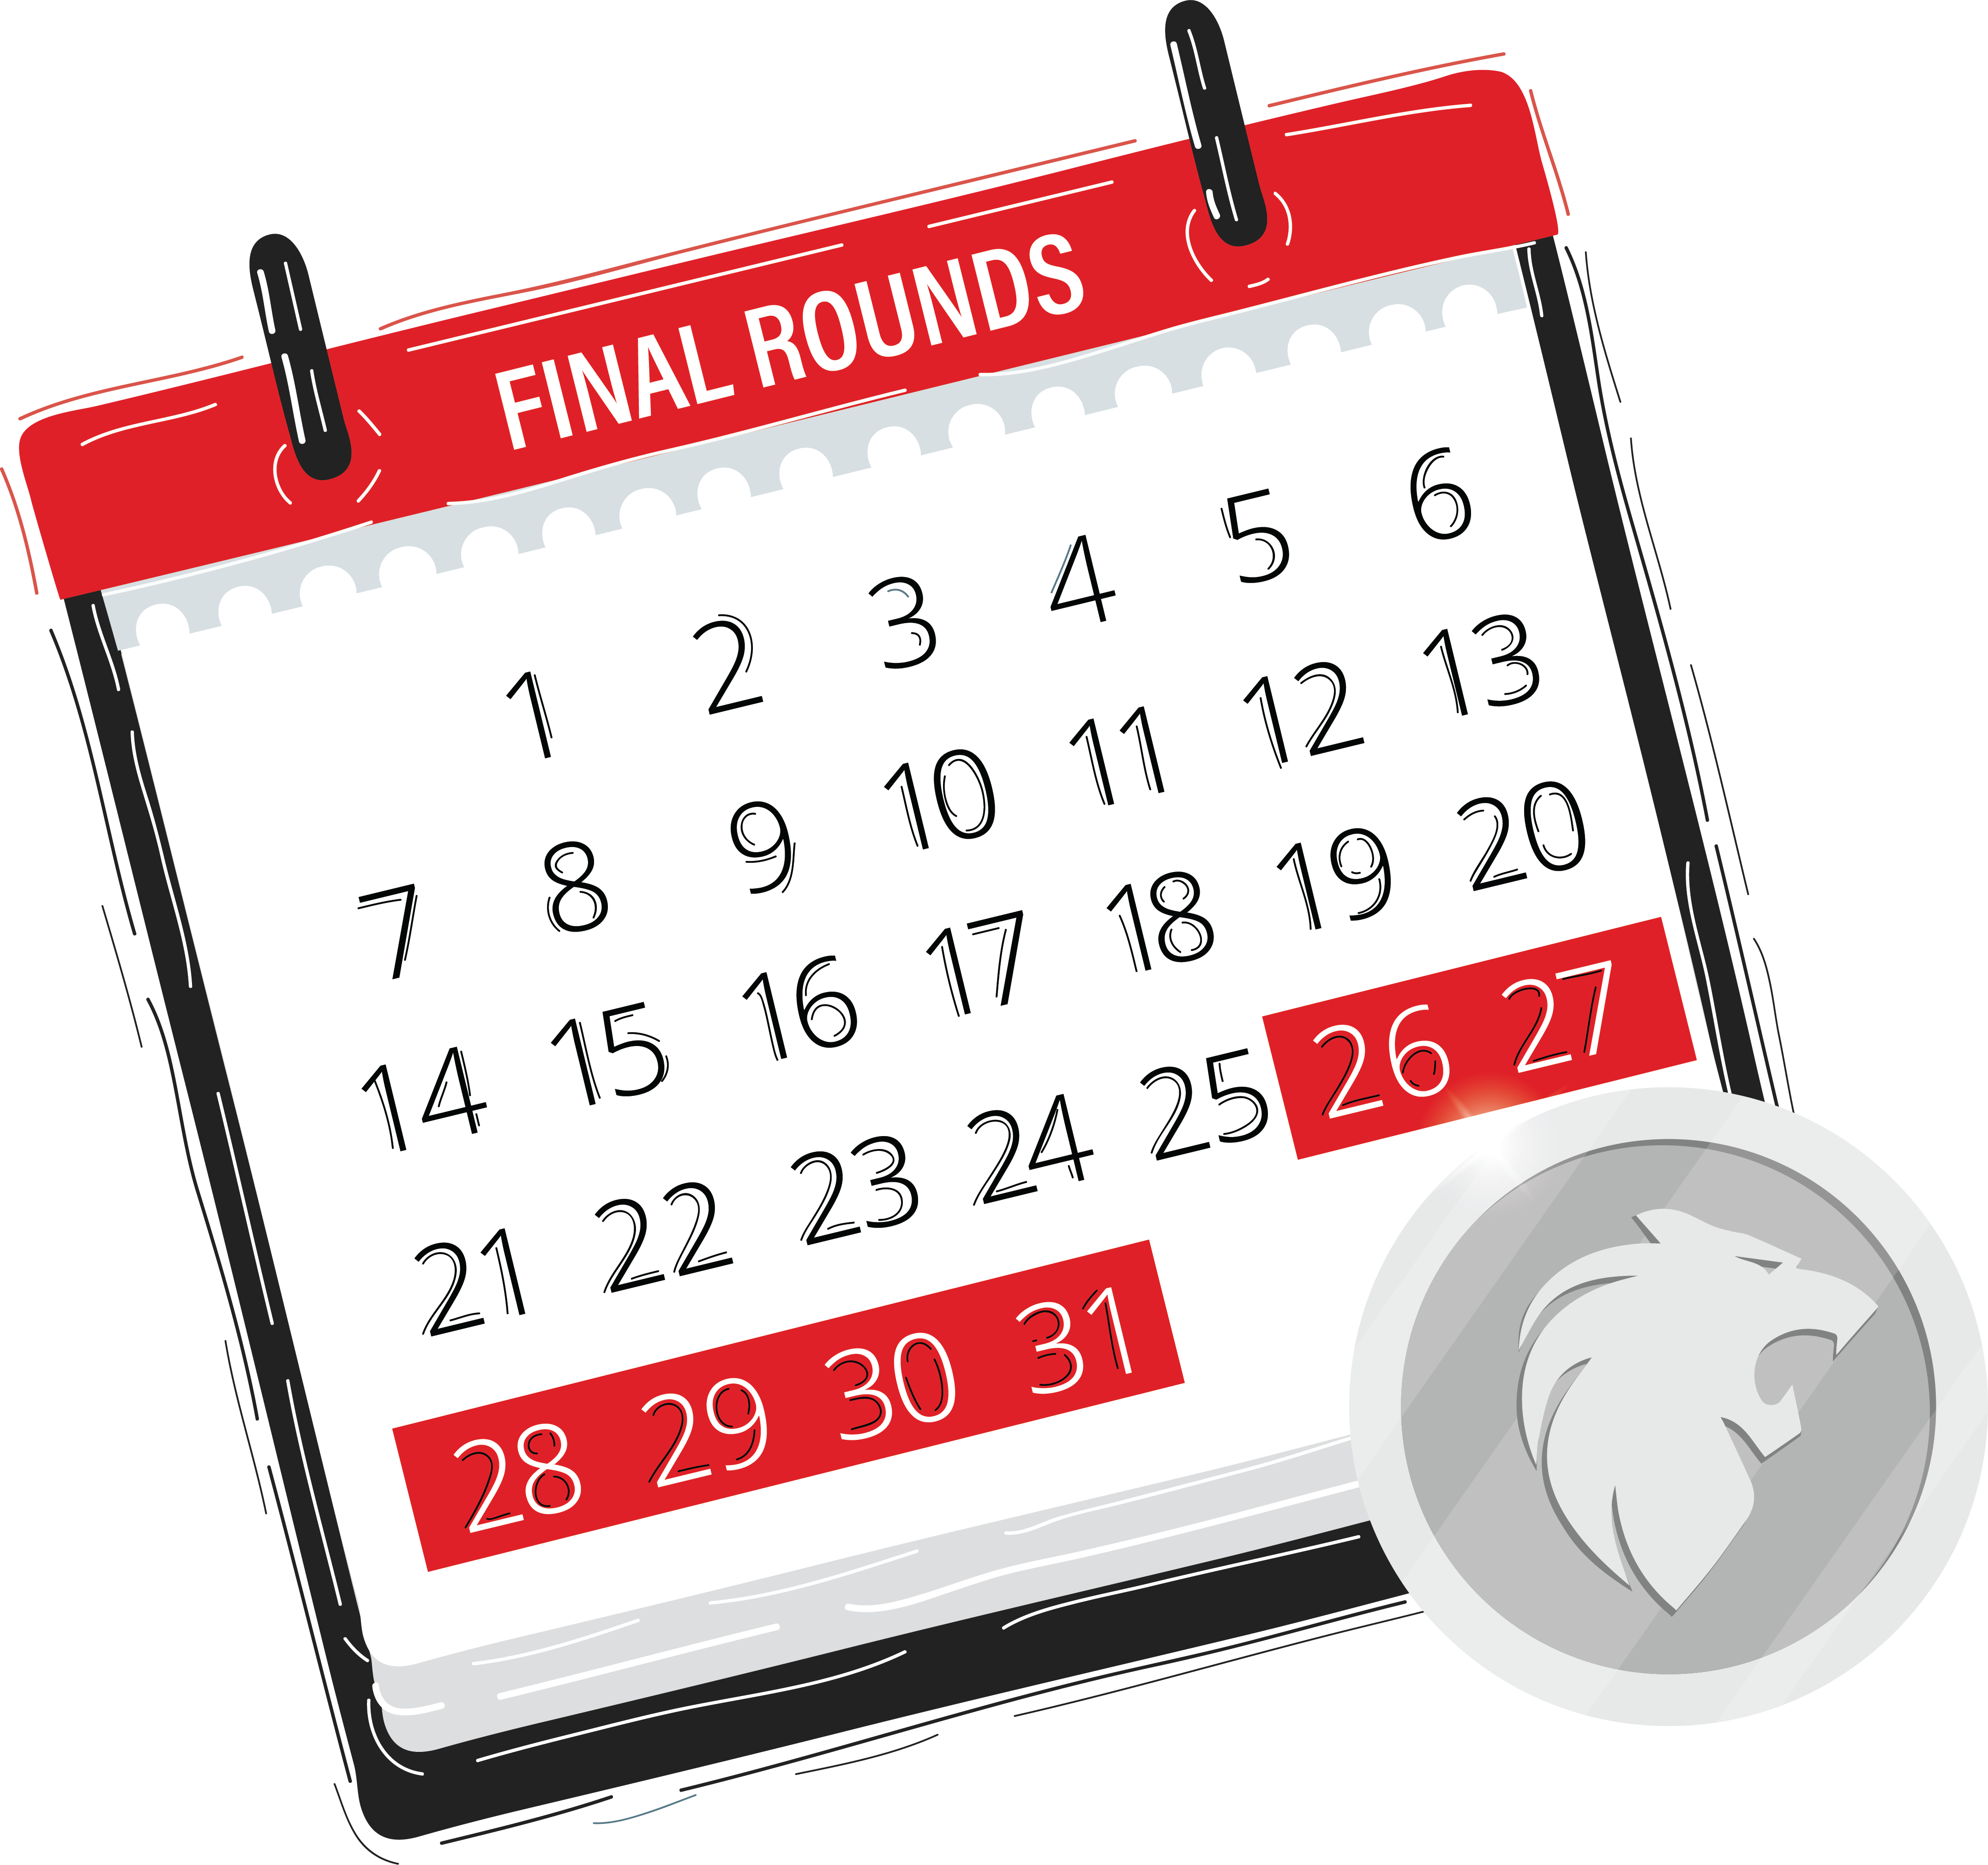 Calendar depicting the final rounds, starting on the 25th day of the month.